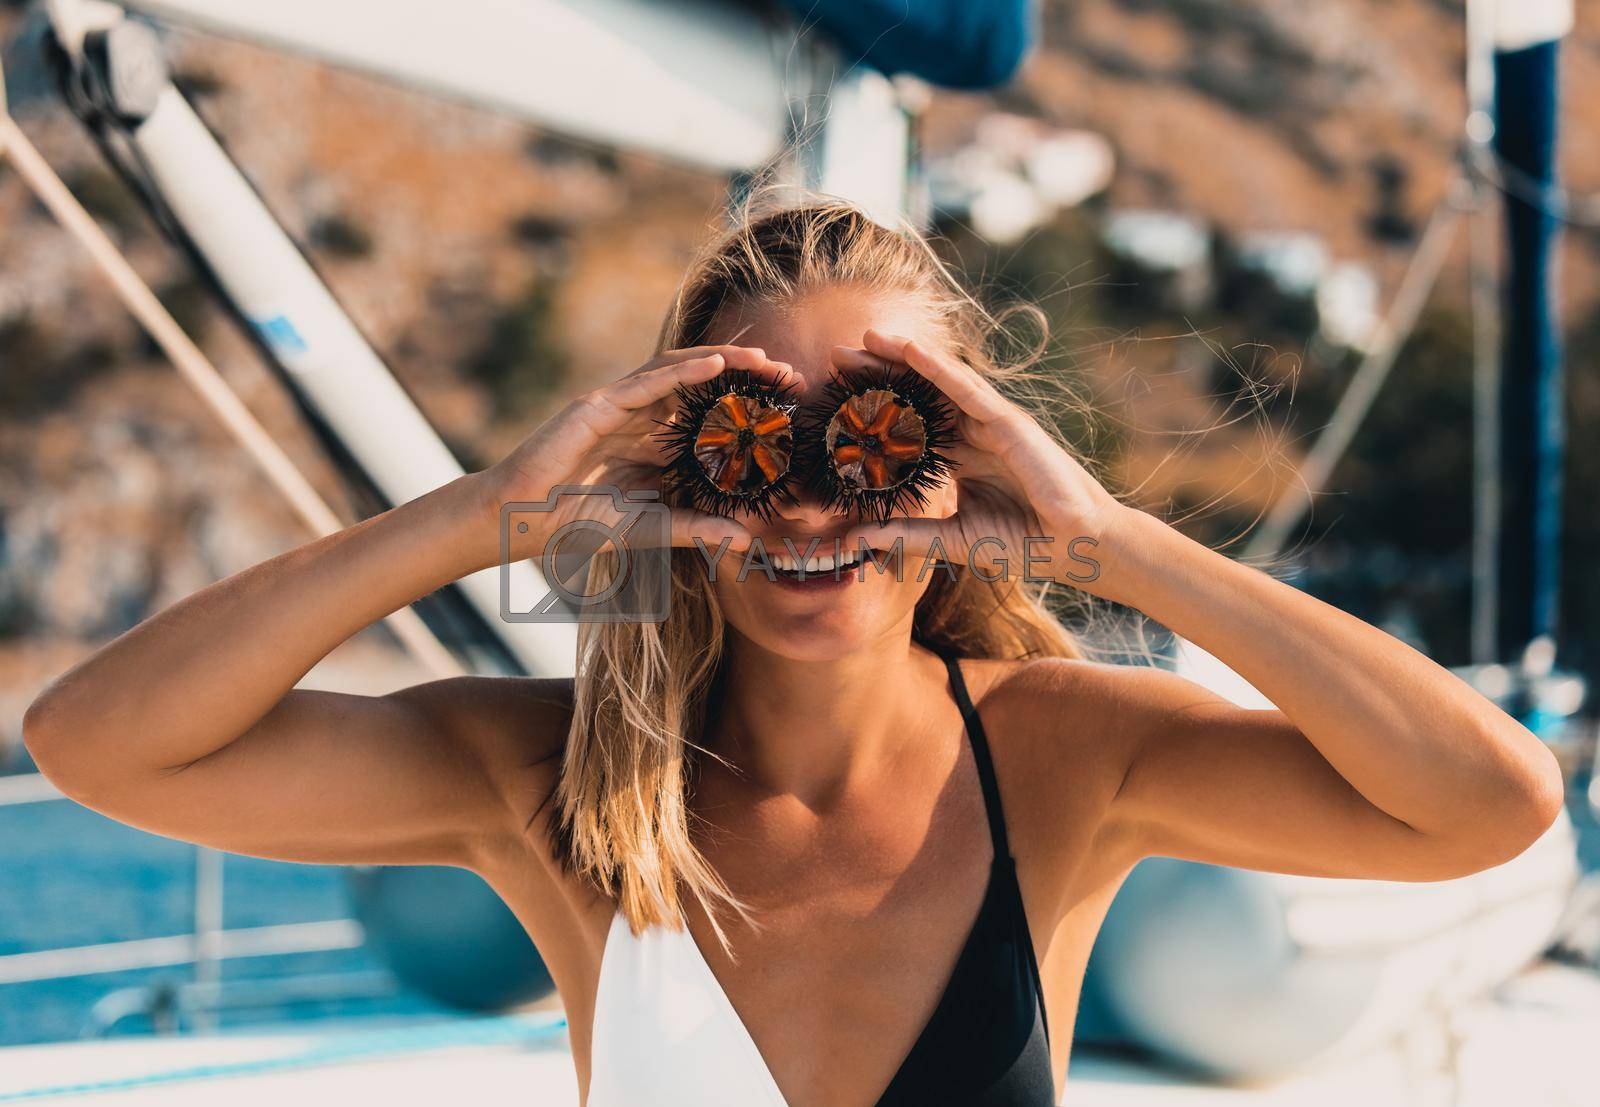 Portrait of a Cute Happy Girl Having Fun. Holding Two Half of a Sea Urchin on Eyes. Laughing and Enjoying Summer Trip on a Sailboat in Greece.